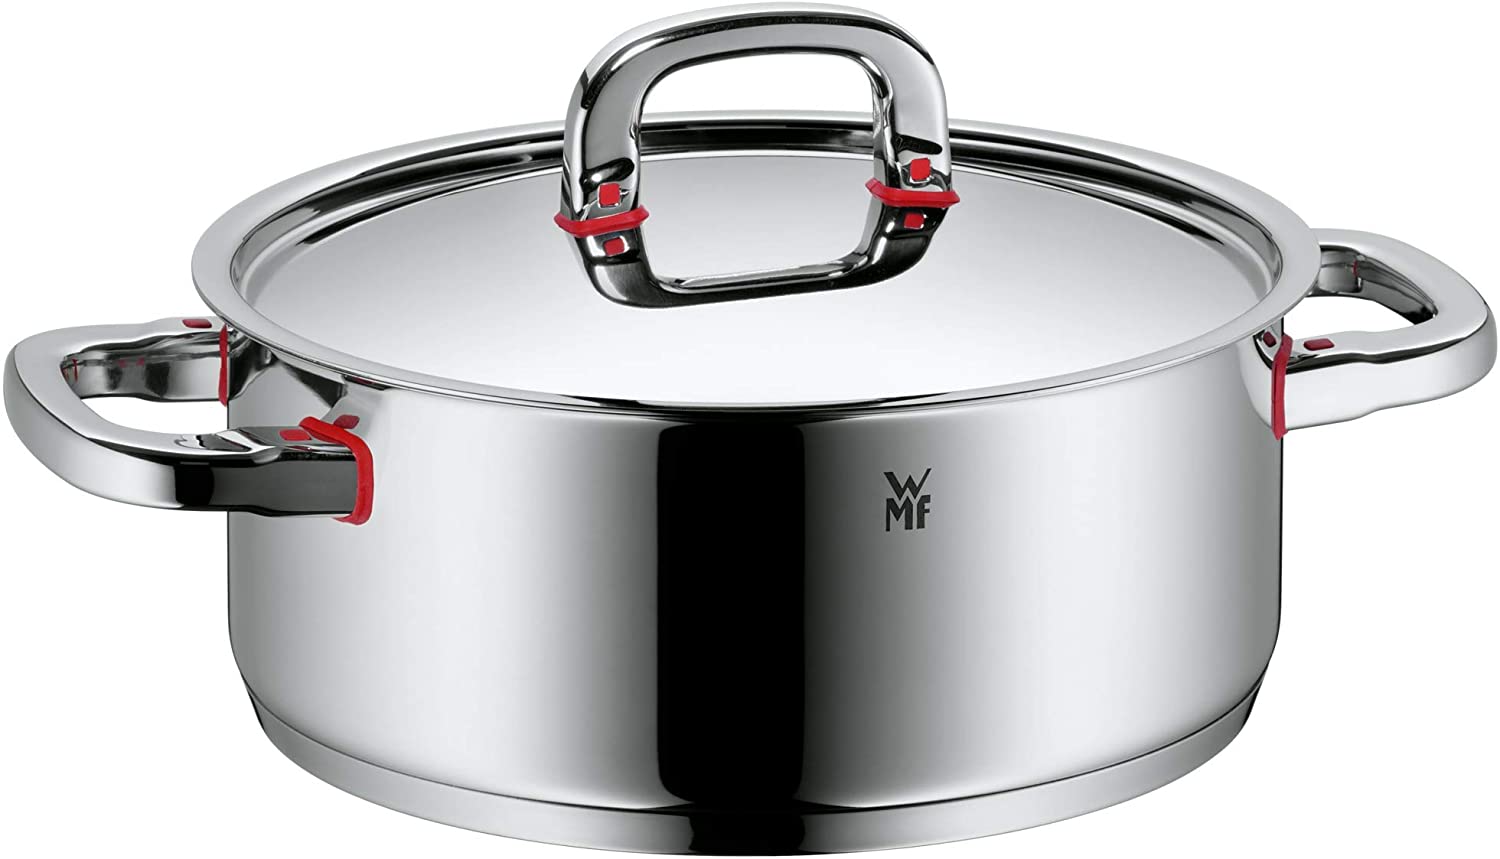 WMF cookware Ø 24 cm approx. 4,1l Premium One Inside scaling vapor hole Cool+ Technology metal lid Cromargan stainless steel brushed suitable for all stove tops including induction dishwasher-safe